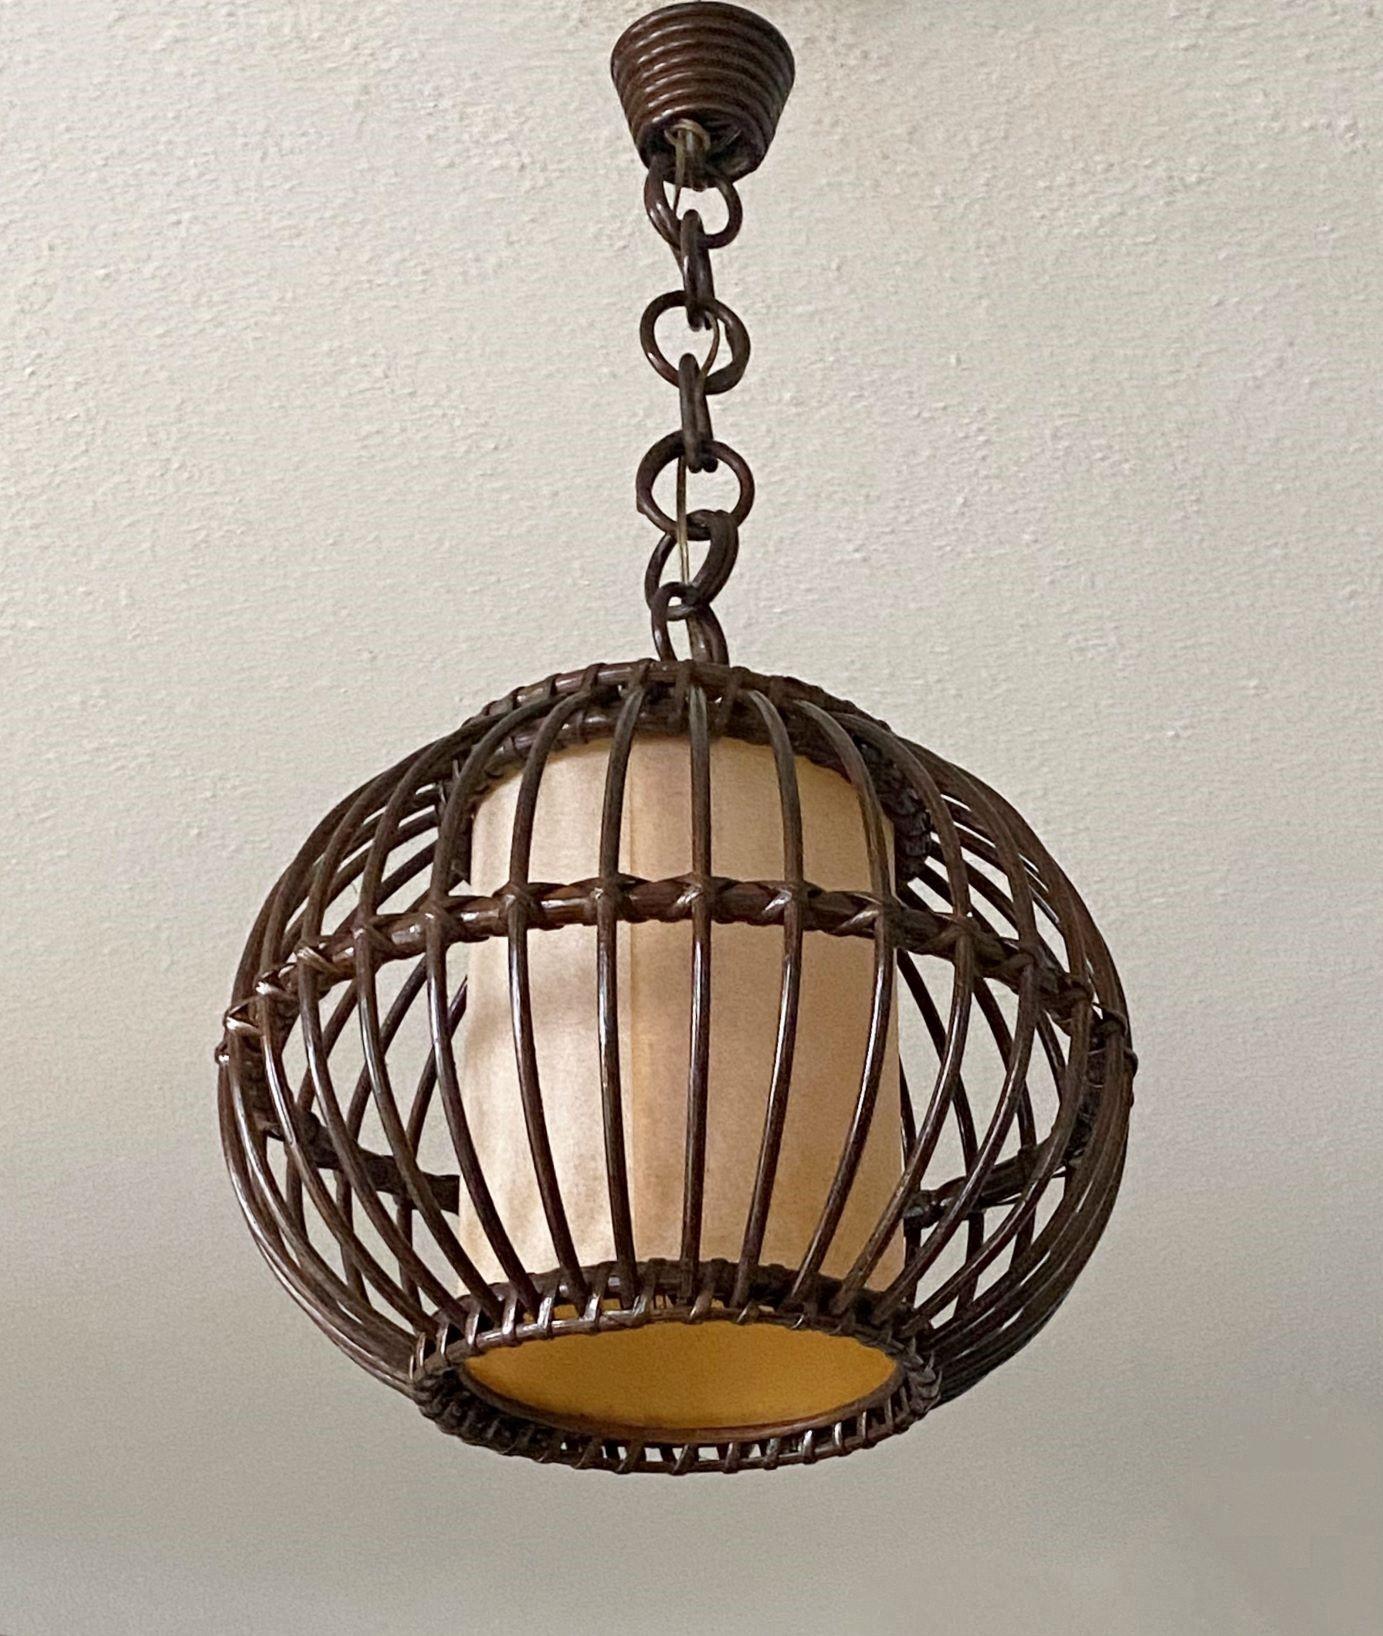 Mid-Century Modern Louis Sognot Bamboo Rattan Pendant Lantern with Perchment Shade, France, 1950s For Sale